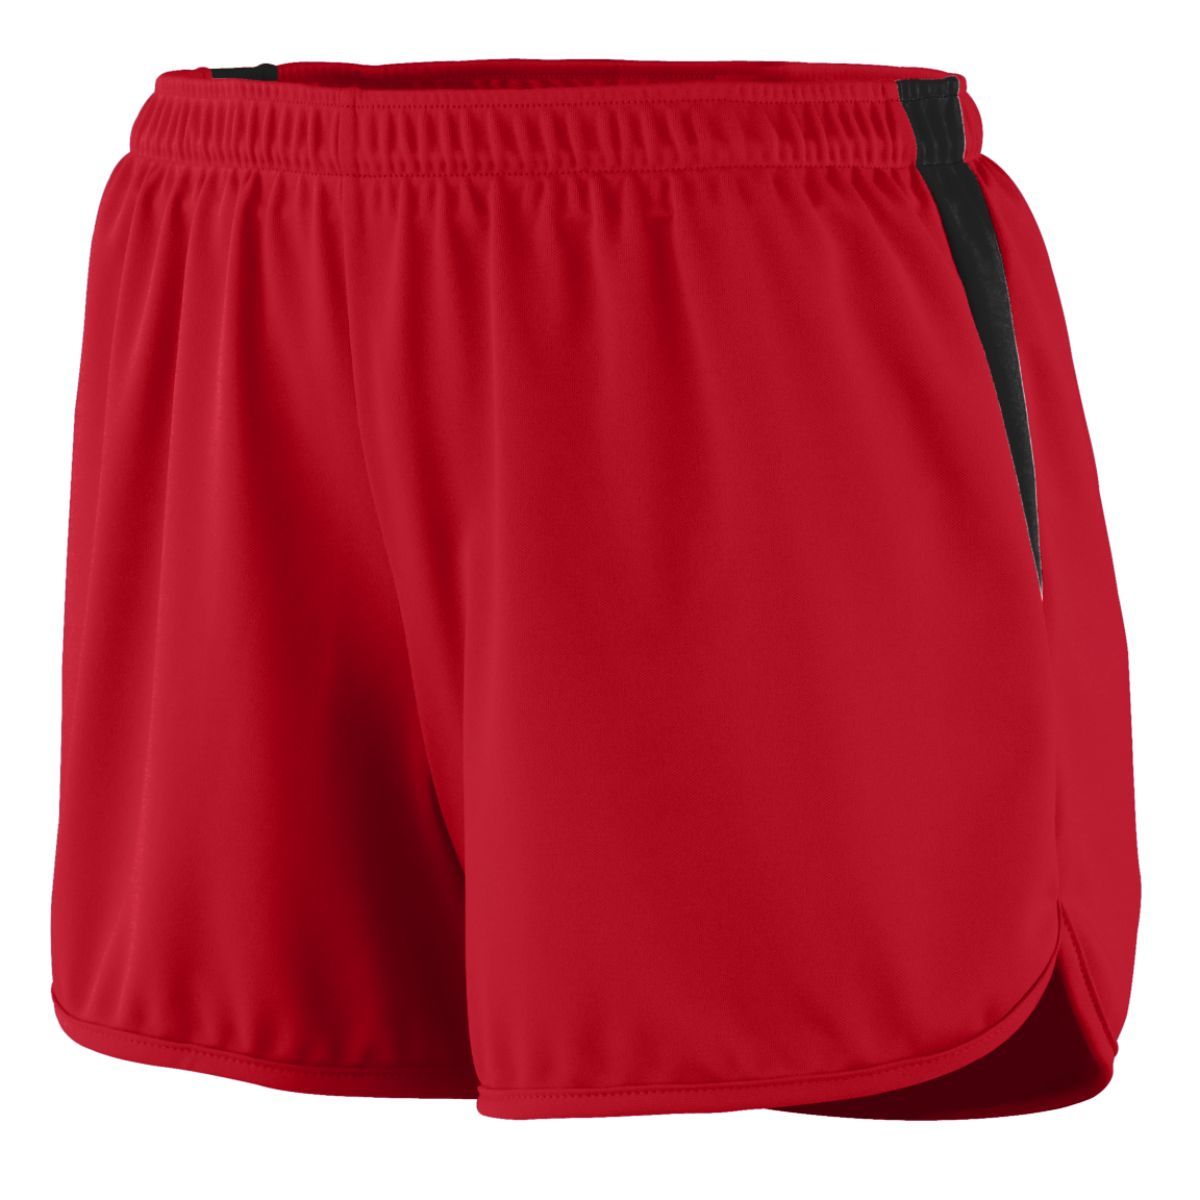 Augusta Sportswear Ladies Rapidpace Track Shorts in Red/Black  -Part of the Ladies, Ladies-Shorts, Augusta-Products, Track-Field product lines at KanaleyCreations.com